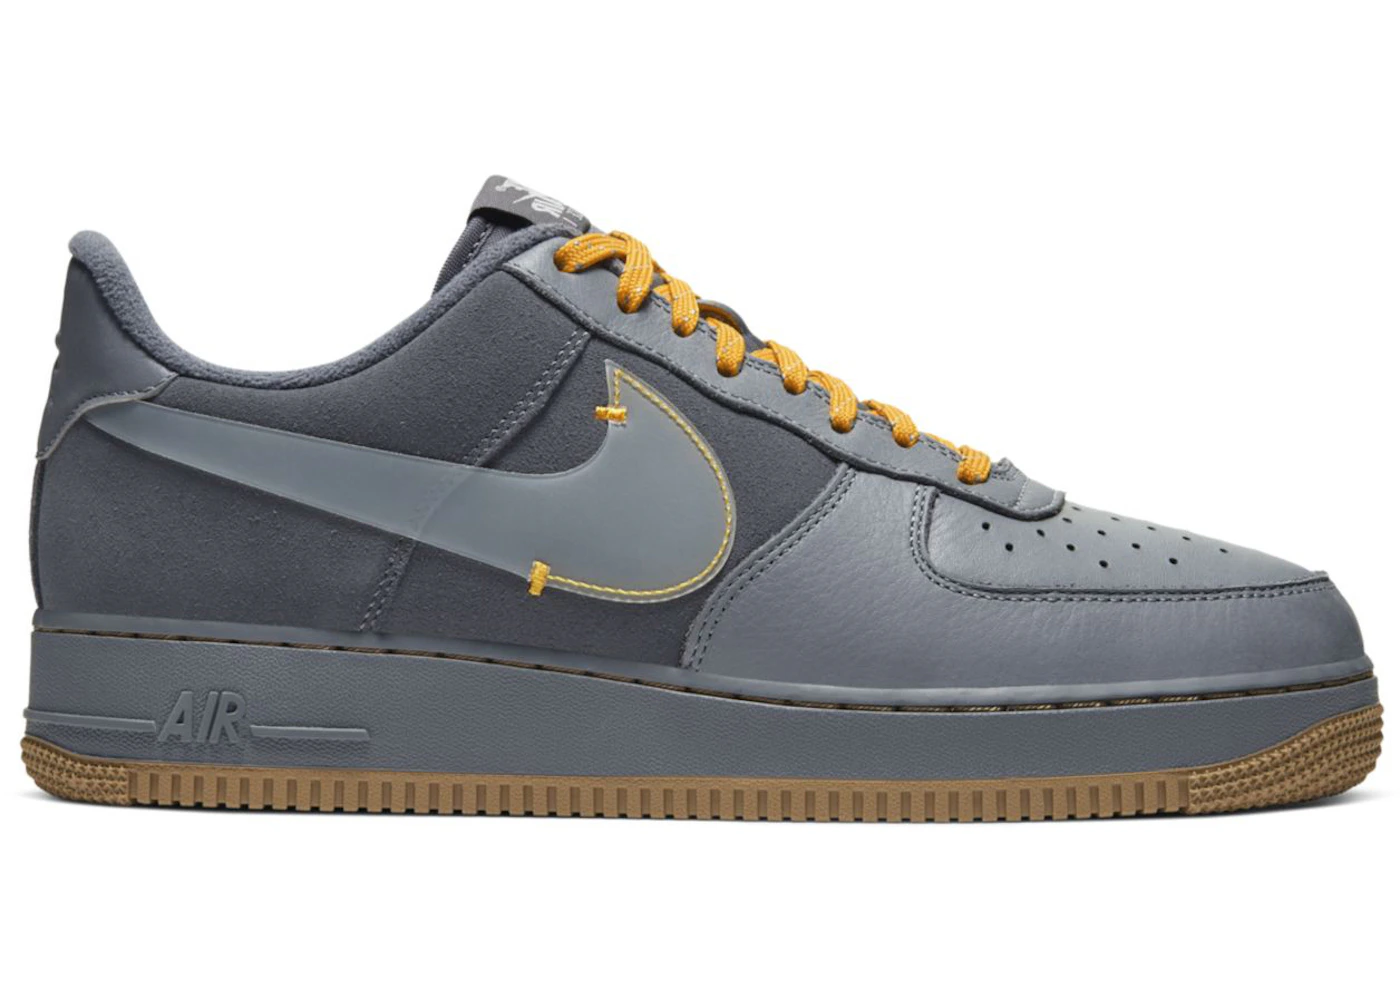 chico Boda equilibrar Nike Air Force 1 Low Cool Grey Men's - CQ6367-001 - US